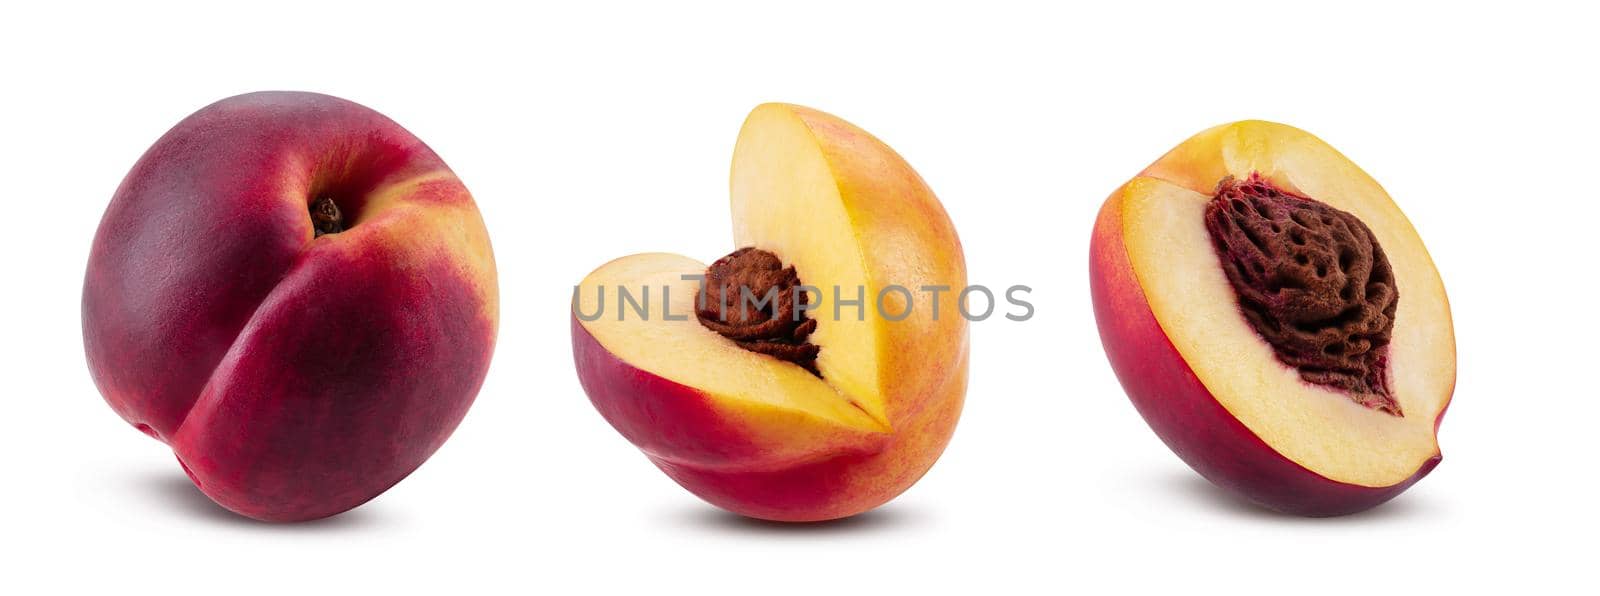 Smooth-skinned, sweet whole nectarine and two cutted out with kernels isolated on white background with copy space for text or images. Variety of peach. Side view. Close-up shot.